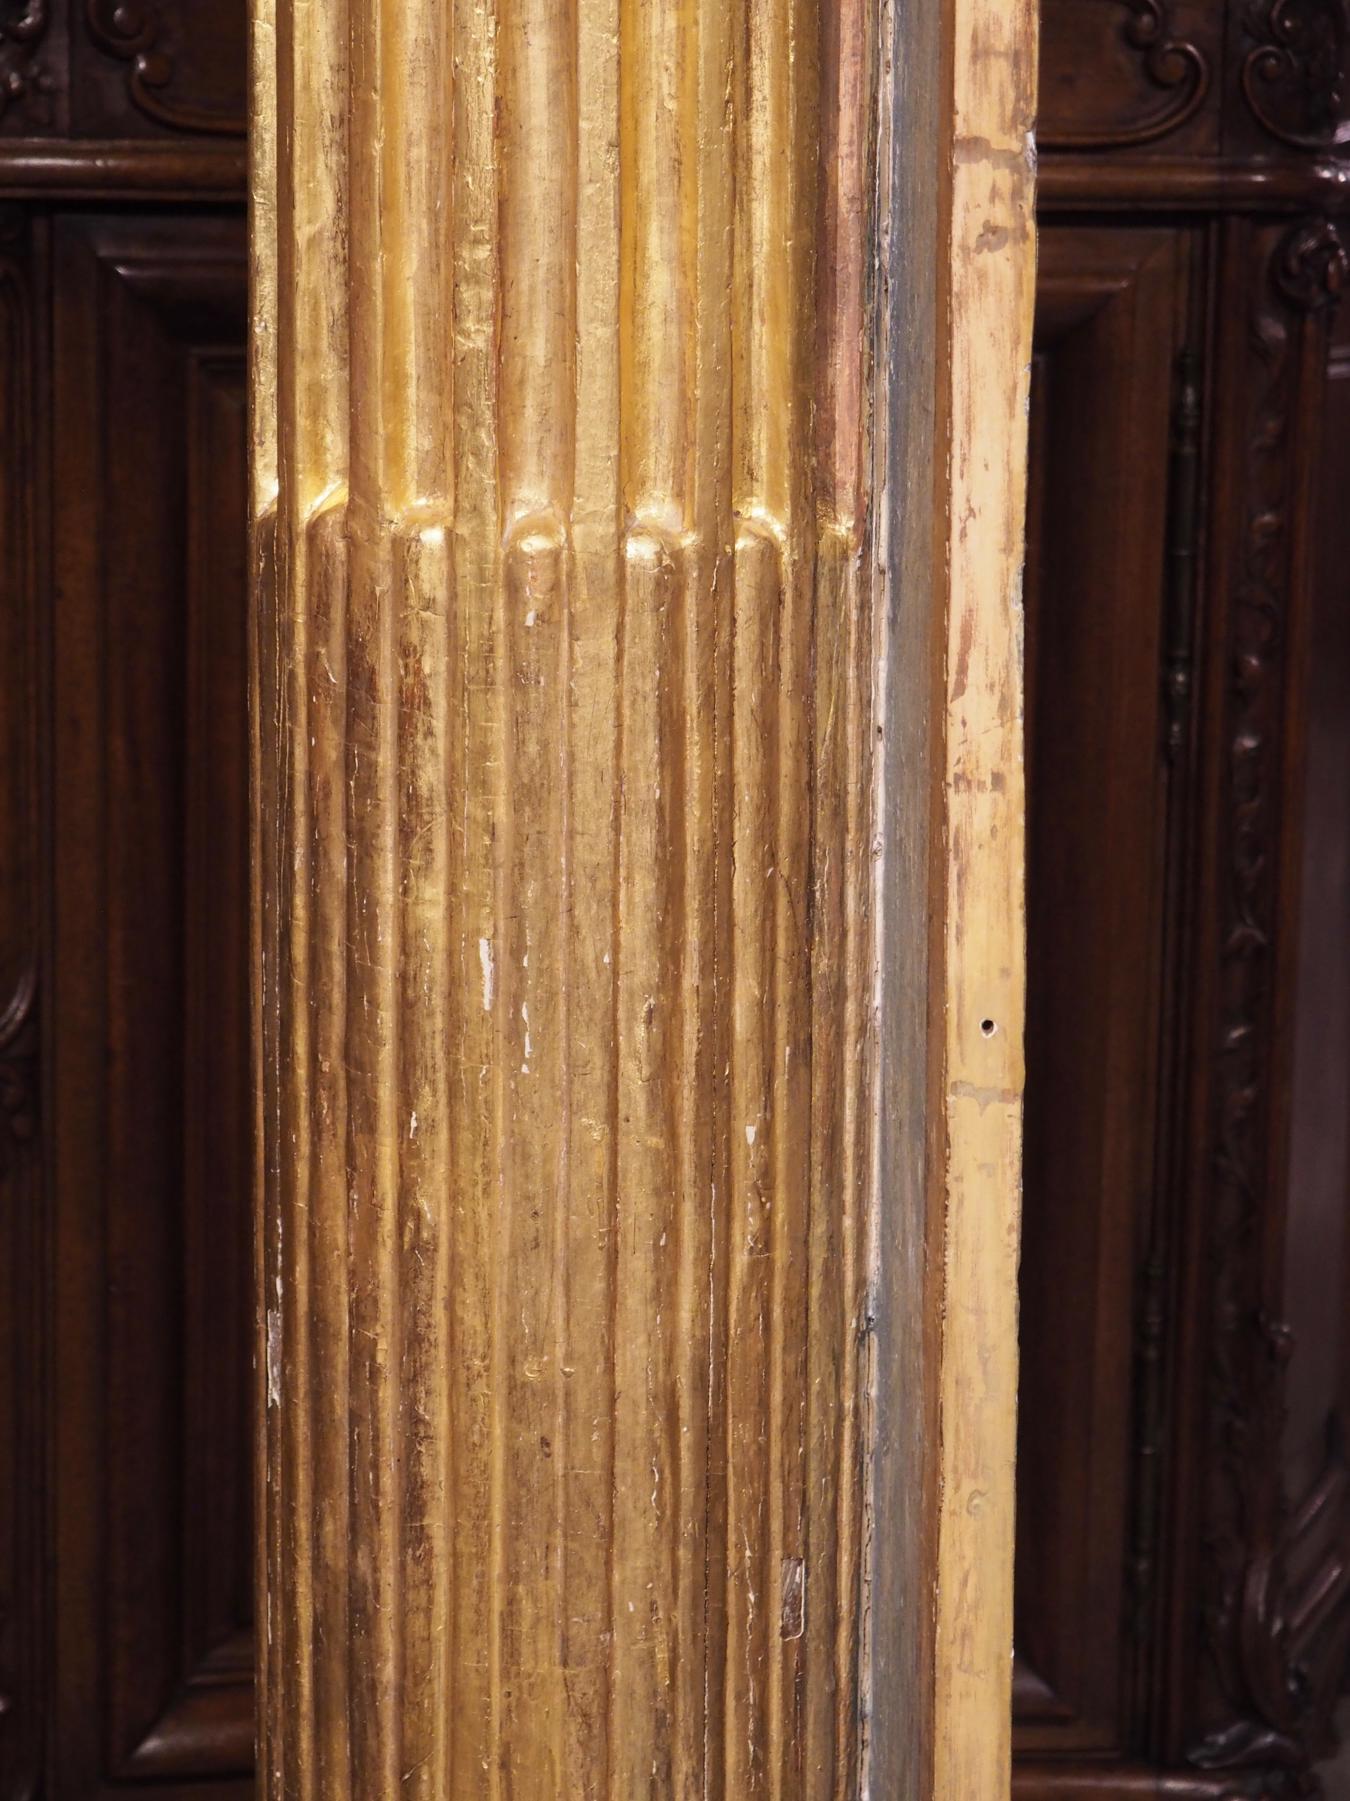 Hand carved in France, circa 1810, this pair of tall Neoclassical giltwood columns was inspired by the Corinthian order. Both of the ¾ columns (meaning they are not complete cylinders) are affixed to a single oak plank. The edges of the board have